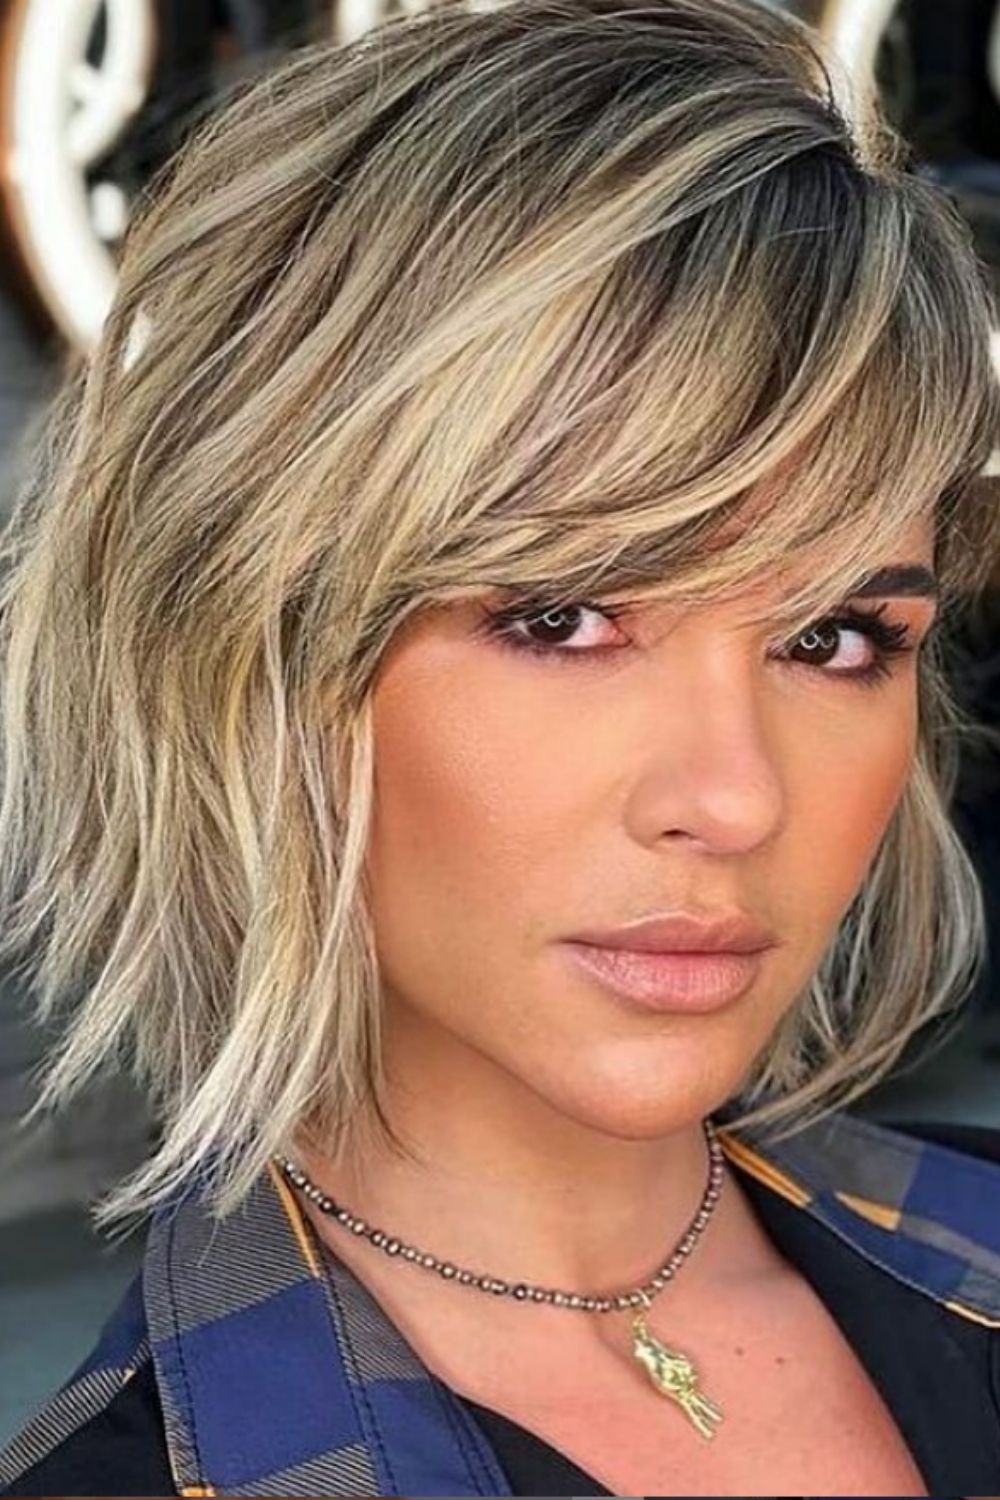 How to style women's messy short haircut and hairstyle 2021?